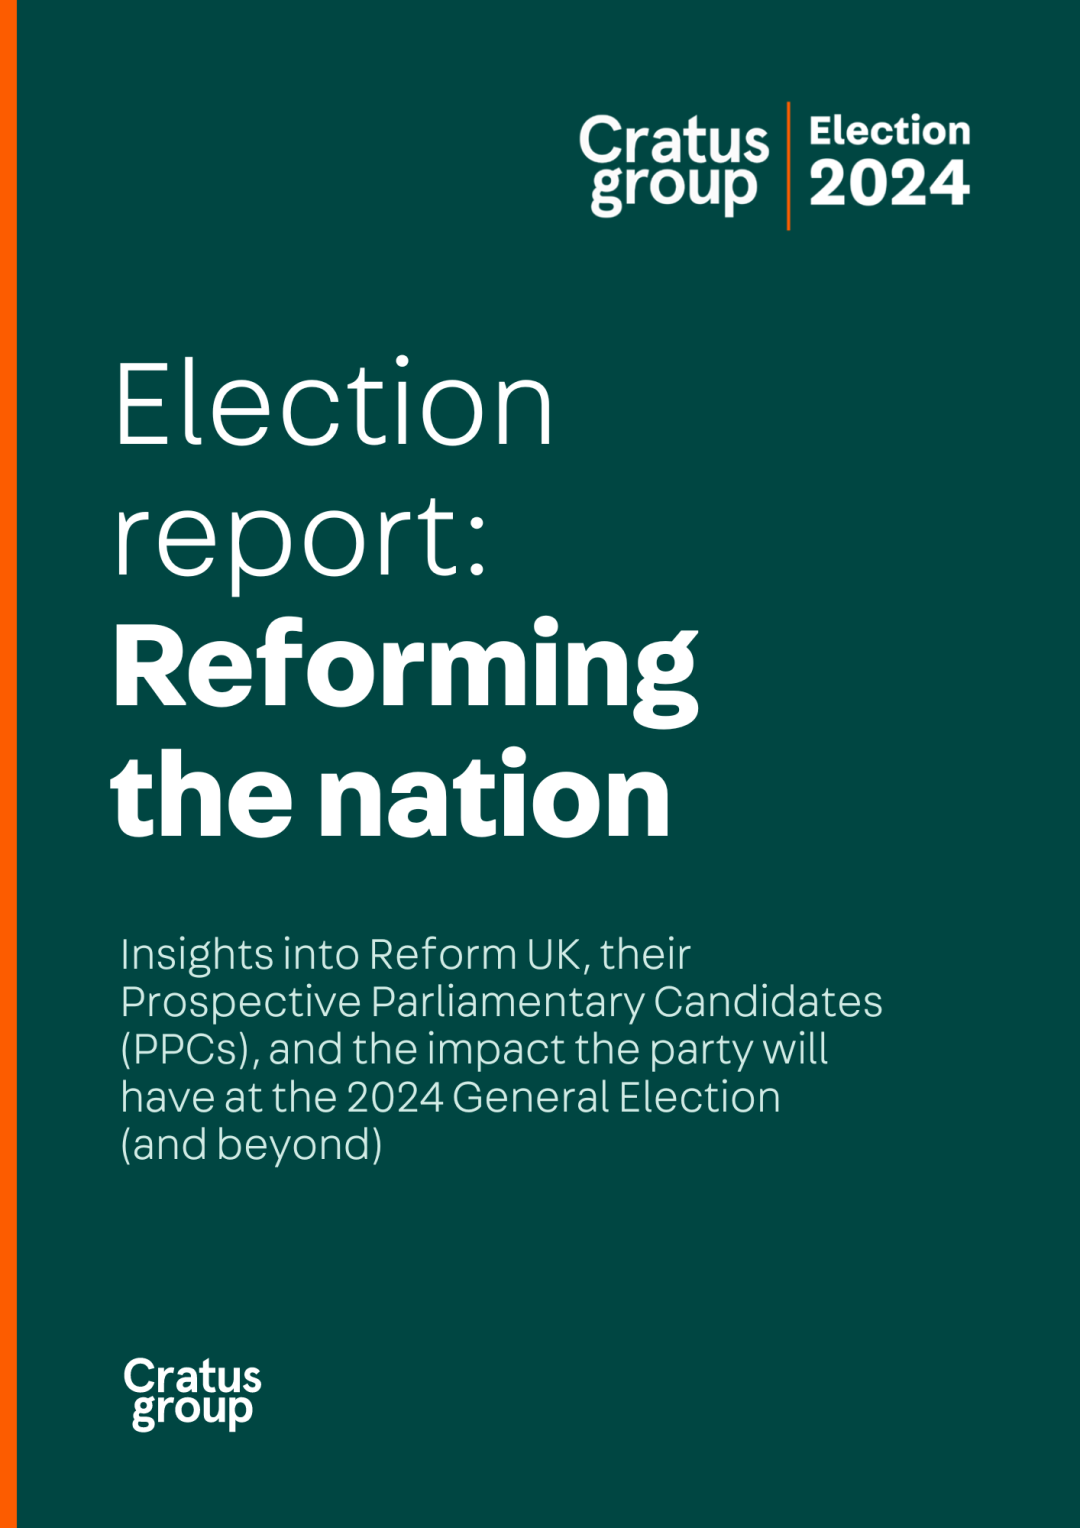 Elections 2024: Reforming the UK